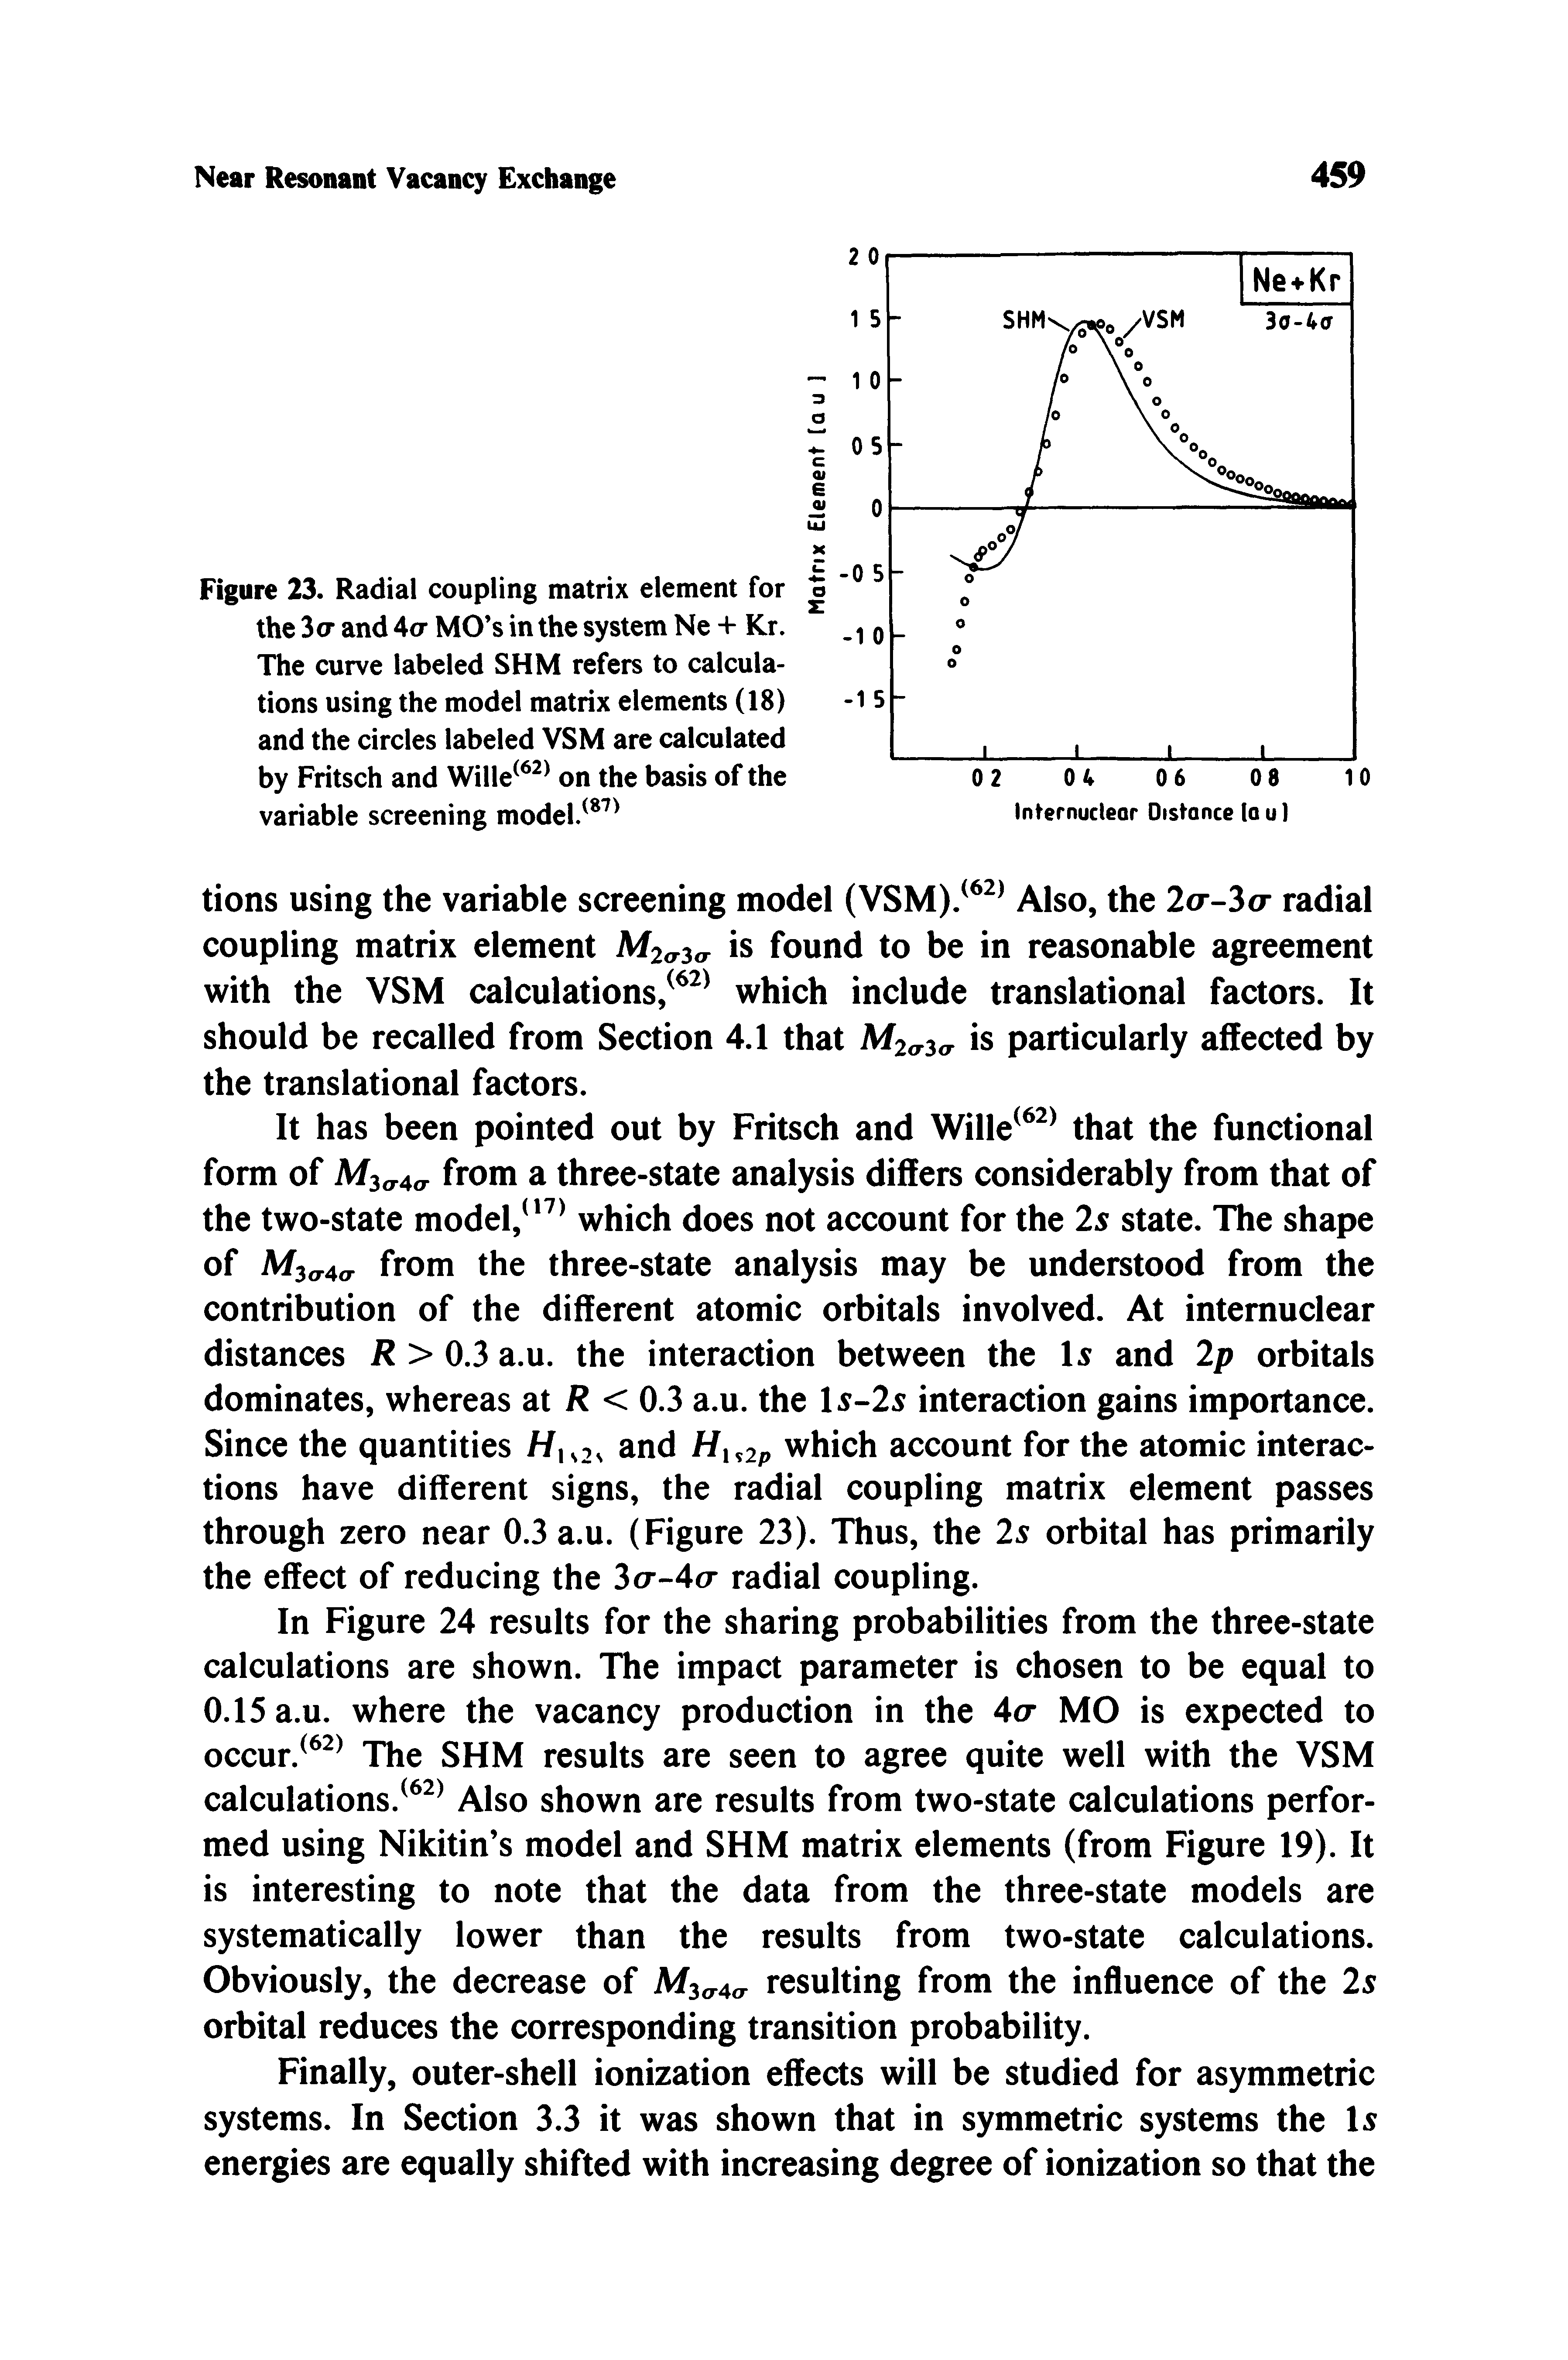 Figure 23. Radial coupling matrix element for the 3o- and 4a MO s in the system Ne + Kr. The curve labeled SHM refers to calculations using the model matrix elements (18) and the circles labeled VSM are calculated by Fritsch and Wille on the basis of the variable screening model/ ...